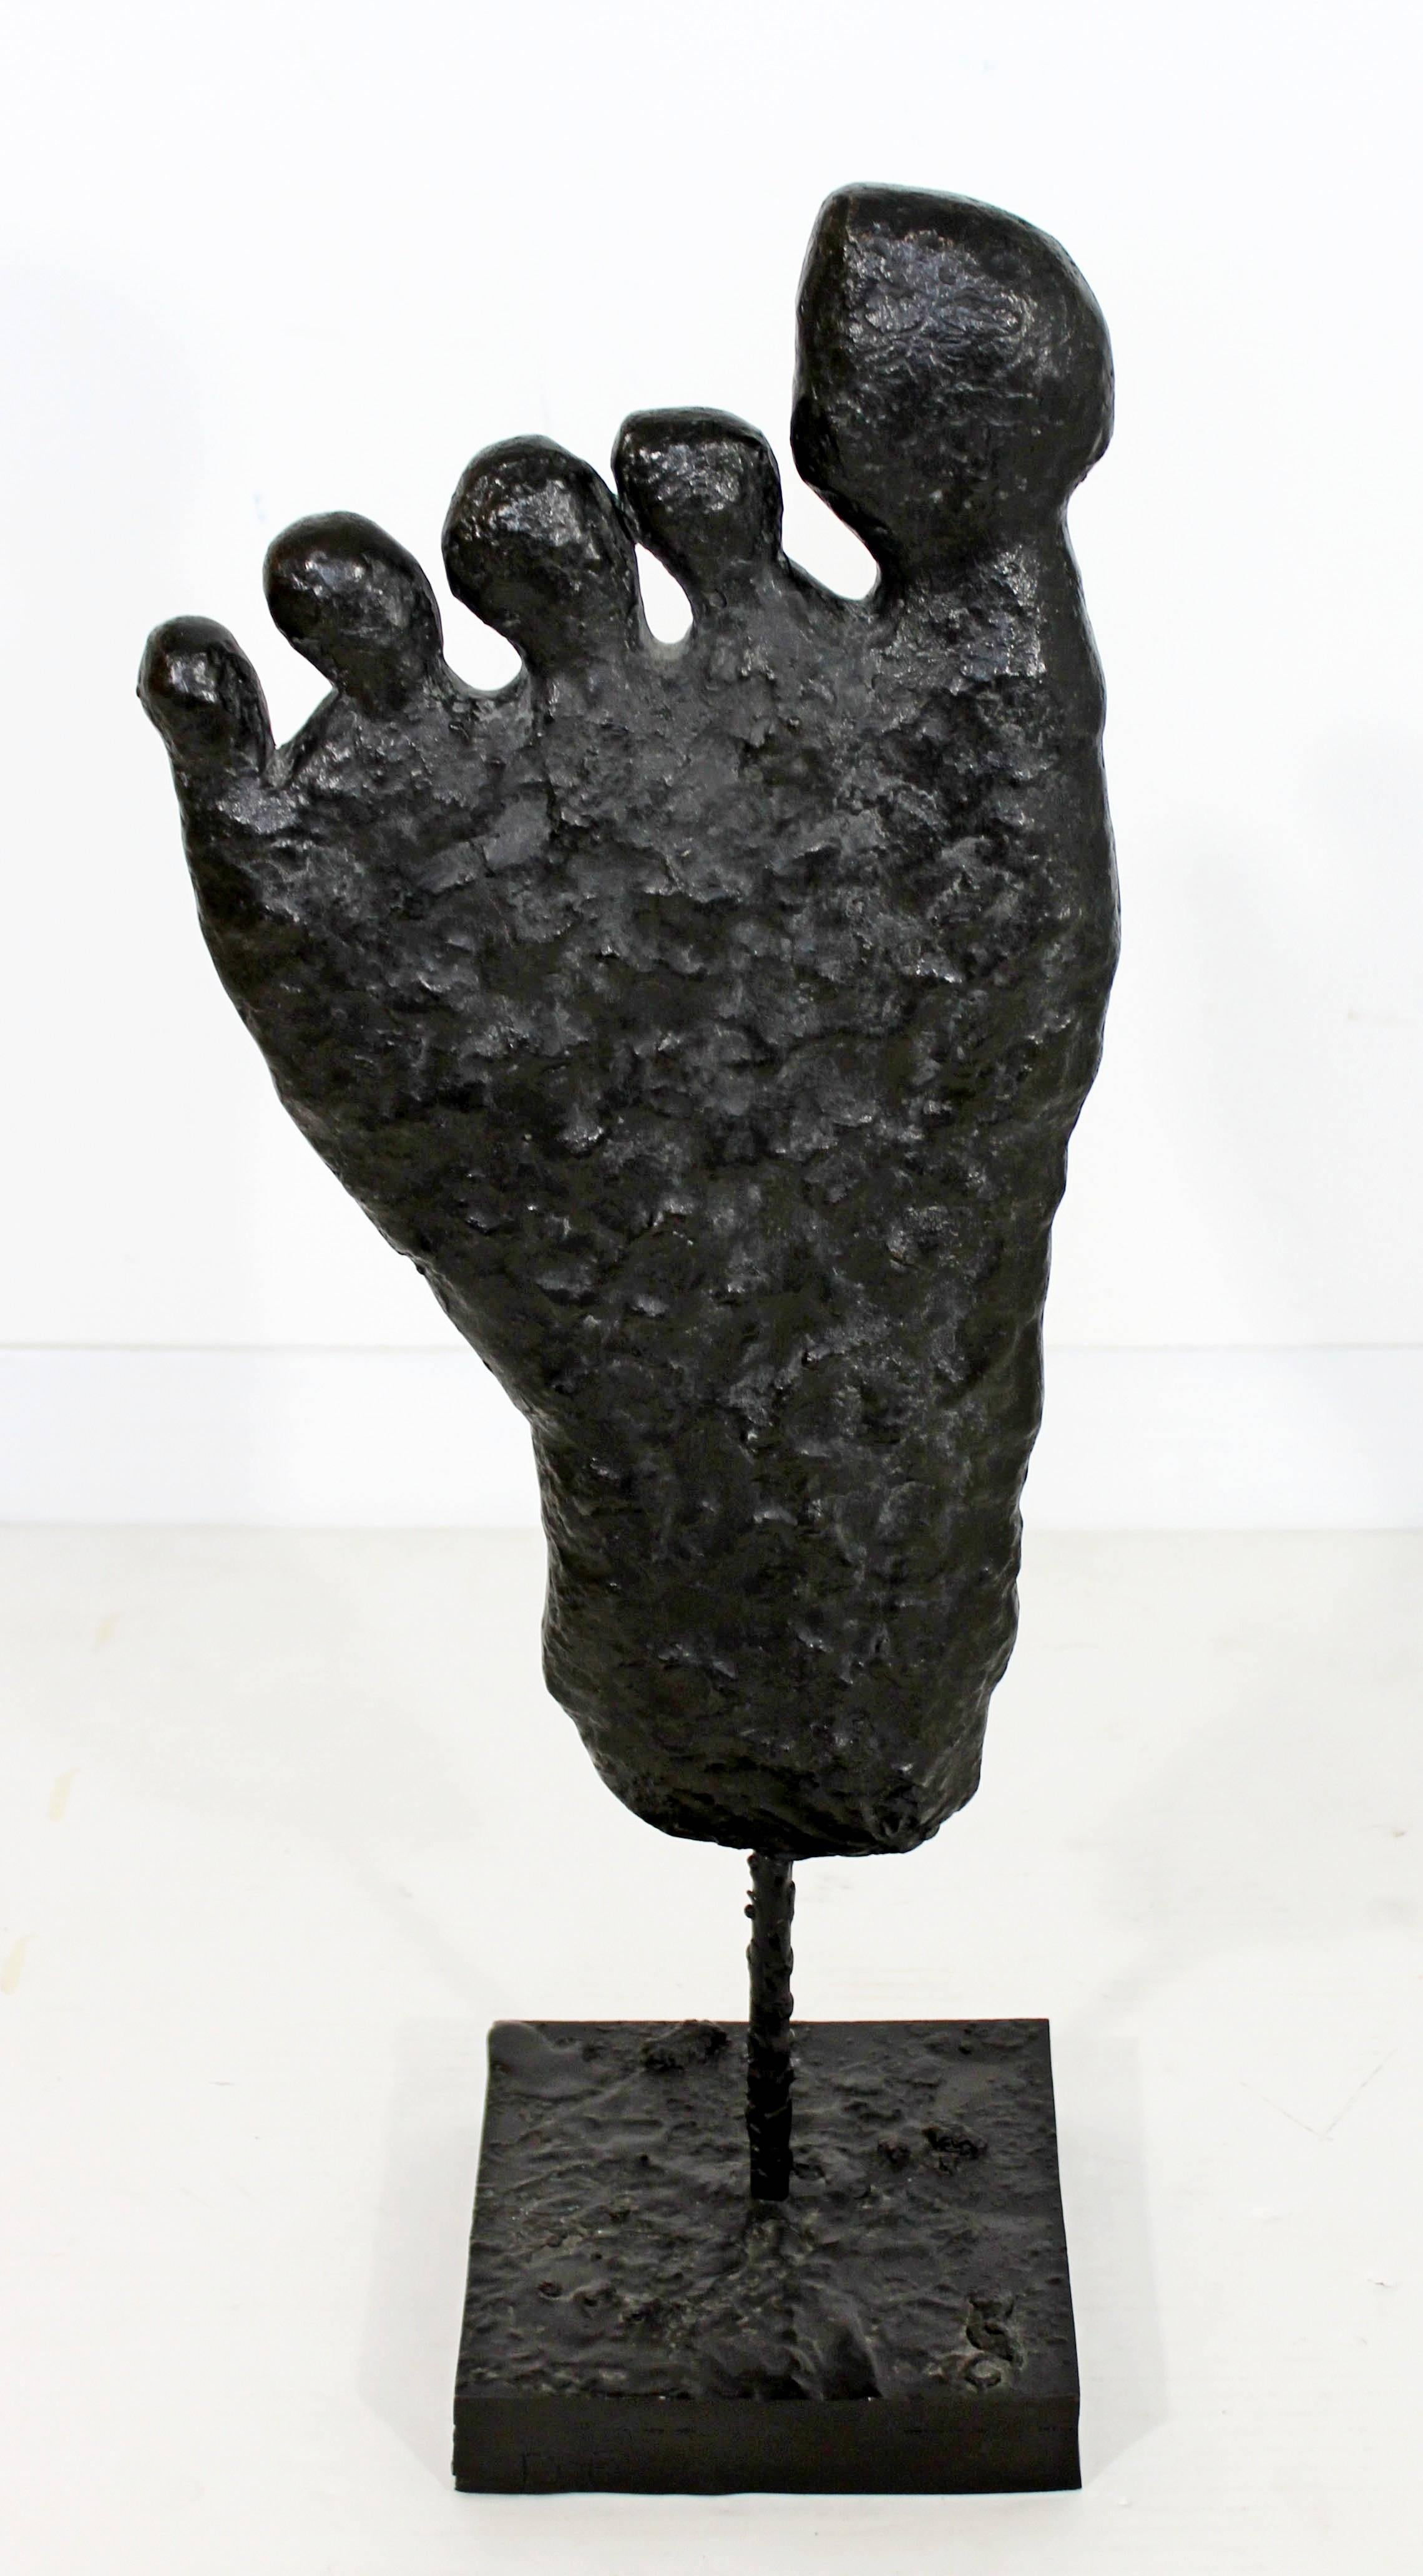 For your consideration is a bronze table sculpture of a foot, signed and numbered 2/2 A.P. by Donald Baechler, circa 2003. In excellent condition. The dimensions are 9.5